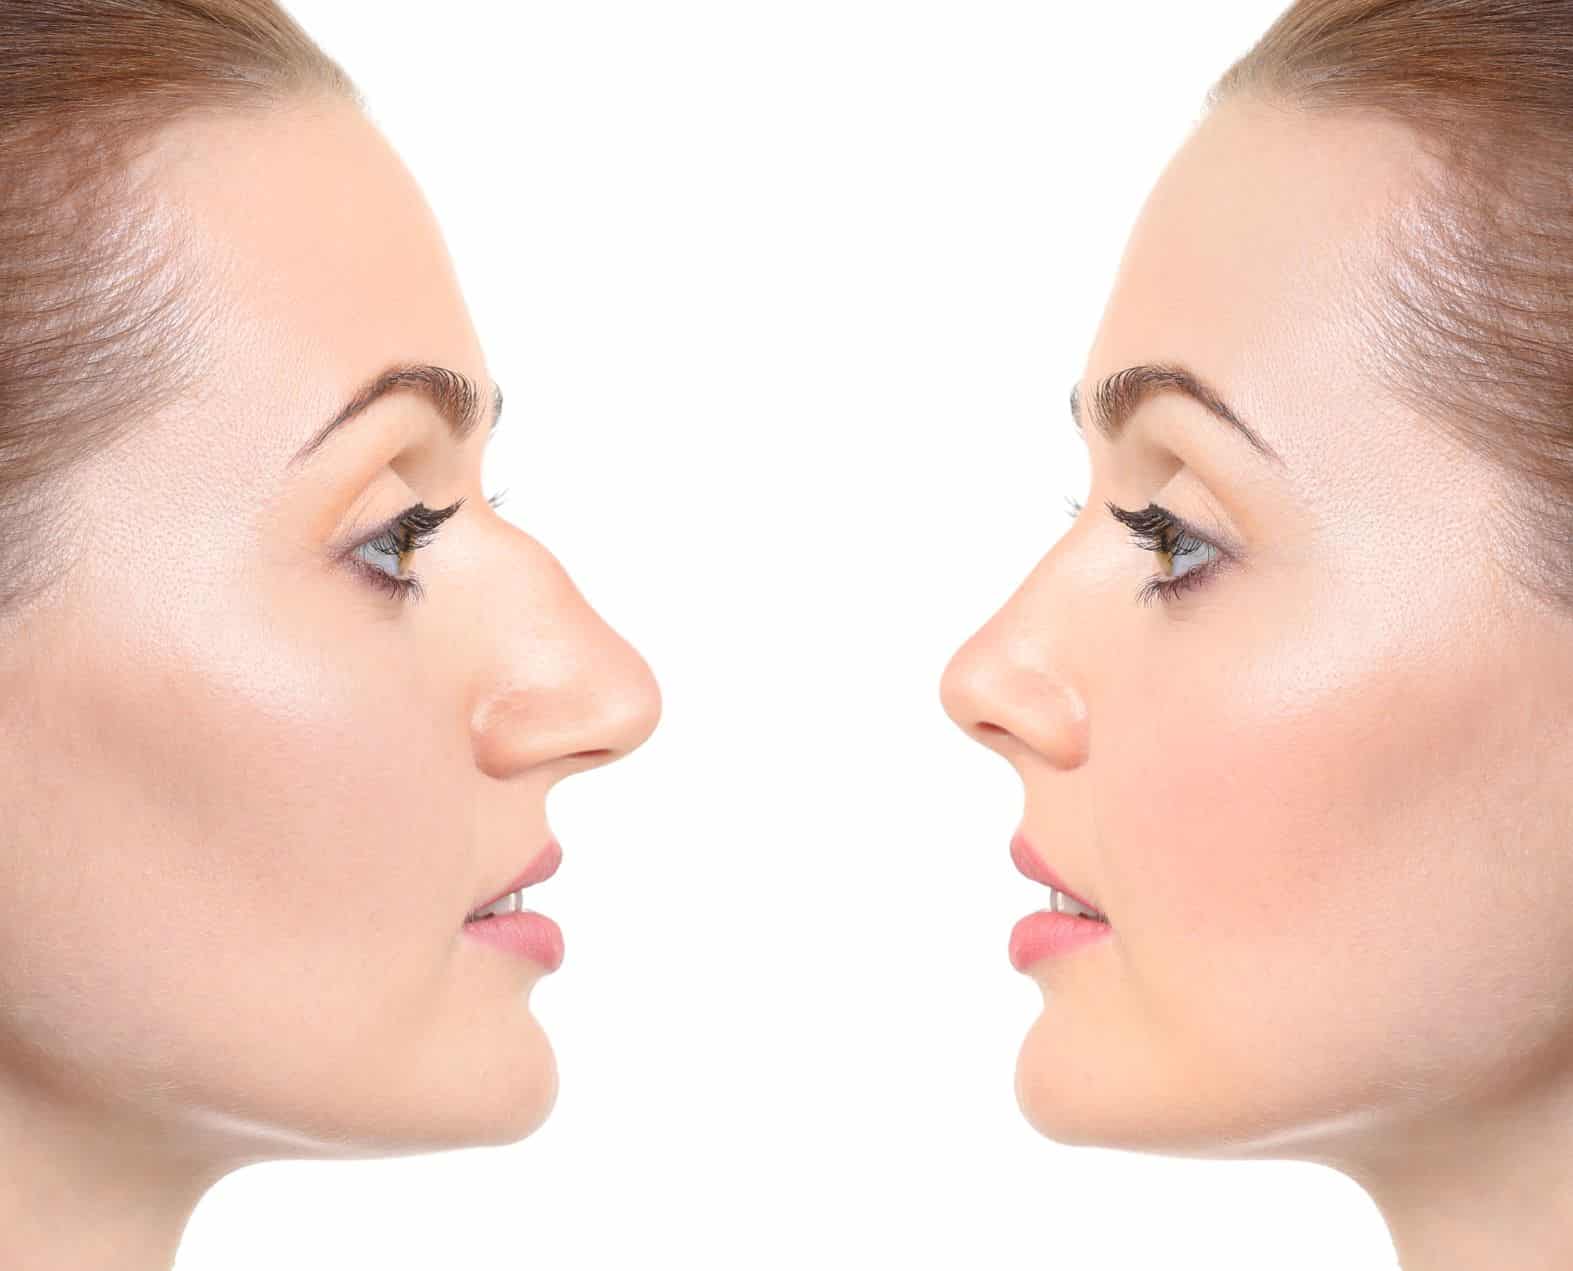 Before and after photos of woman with rhinoplasty